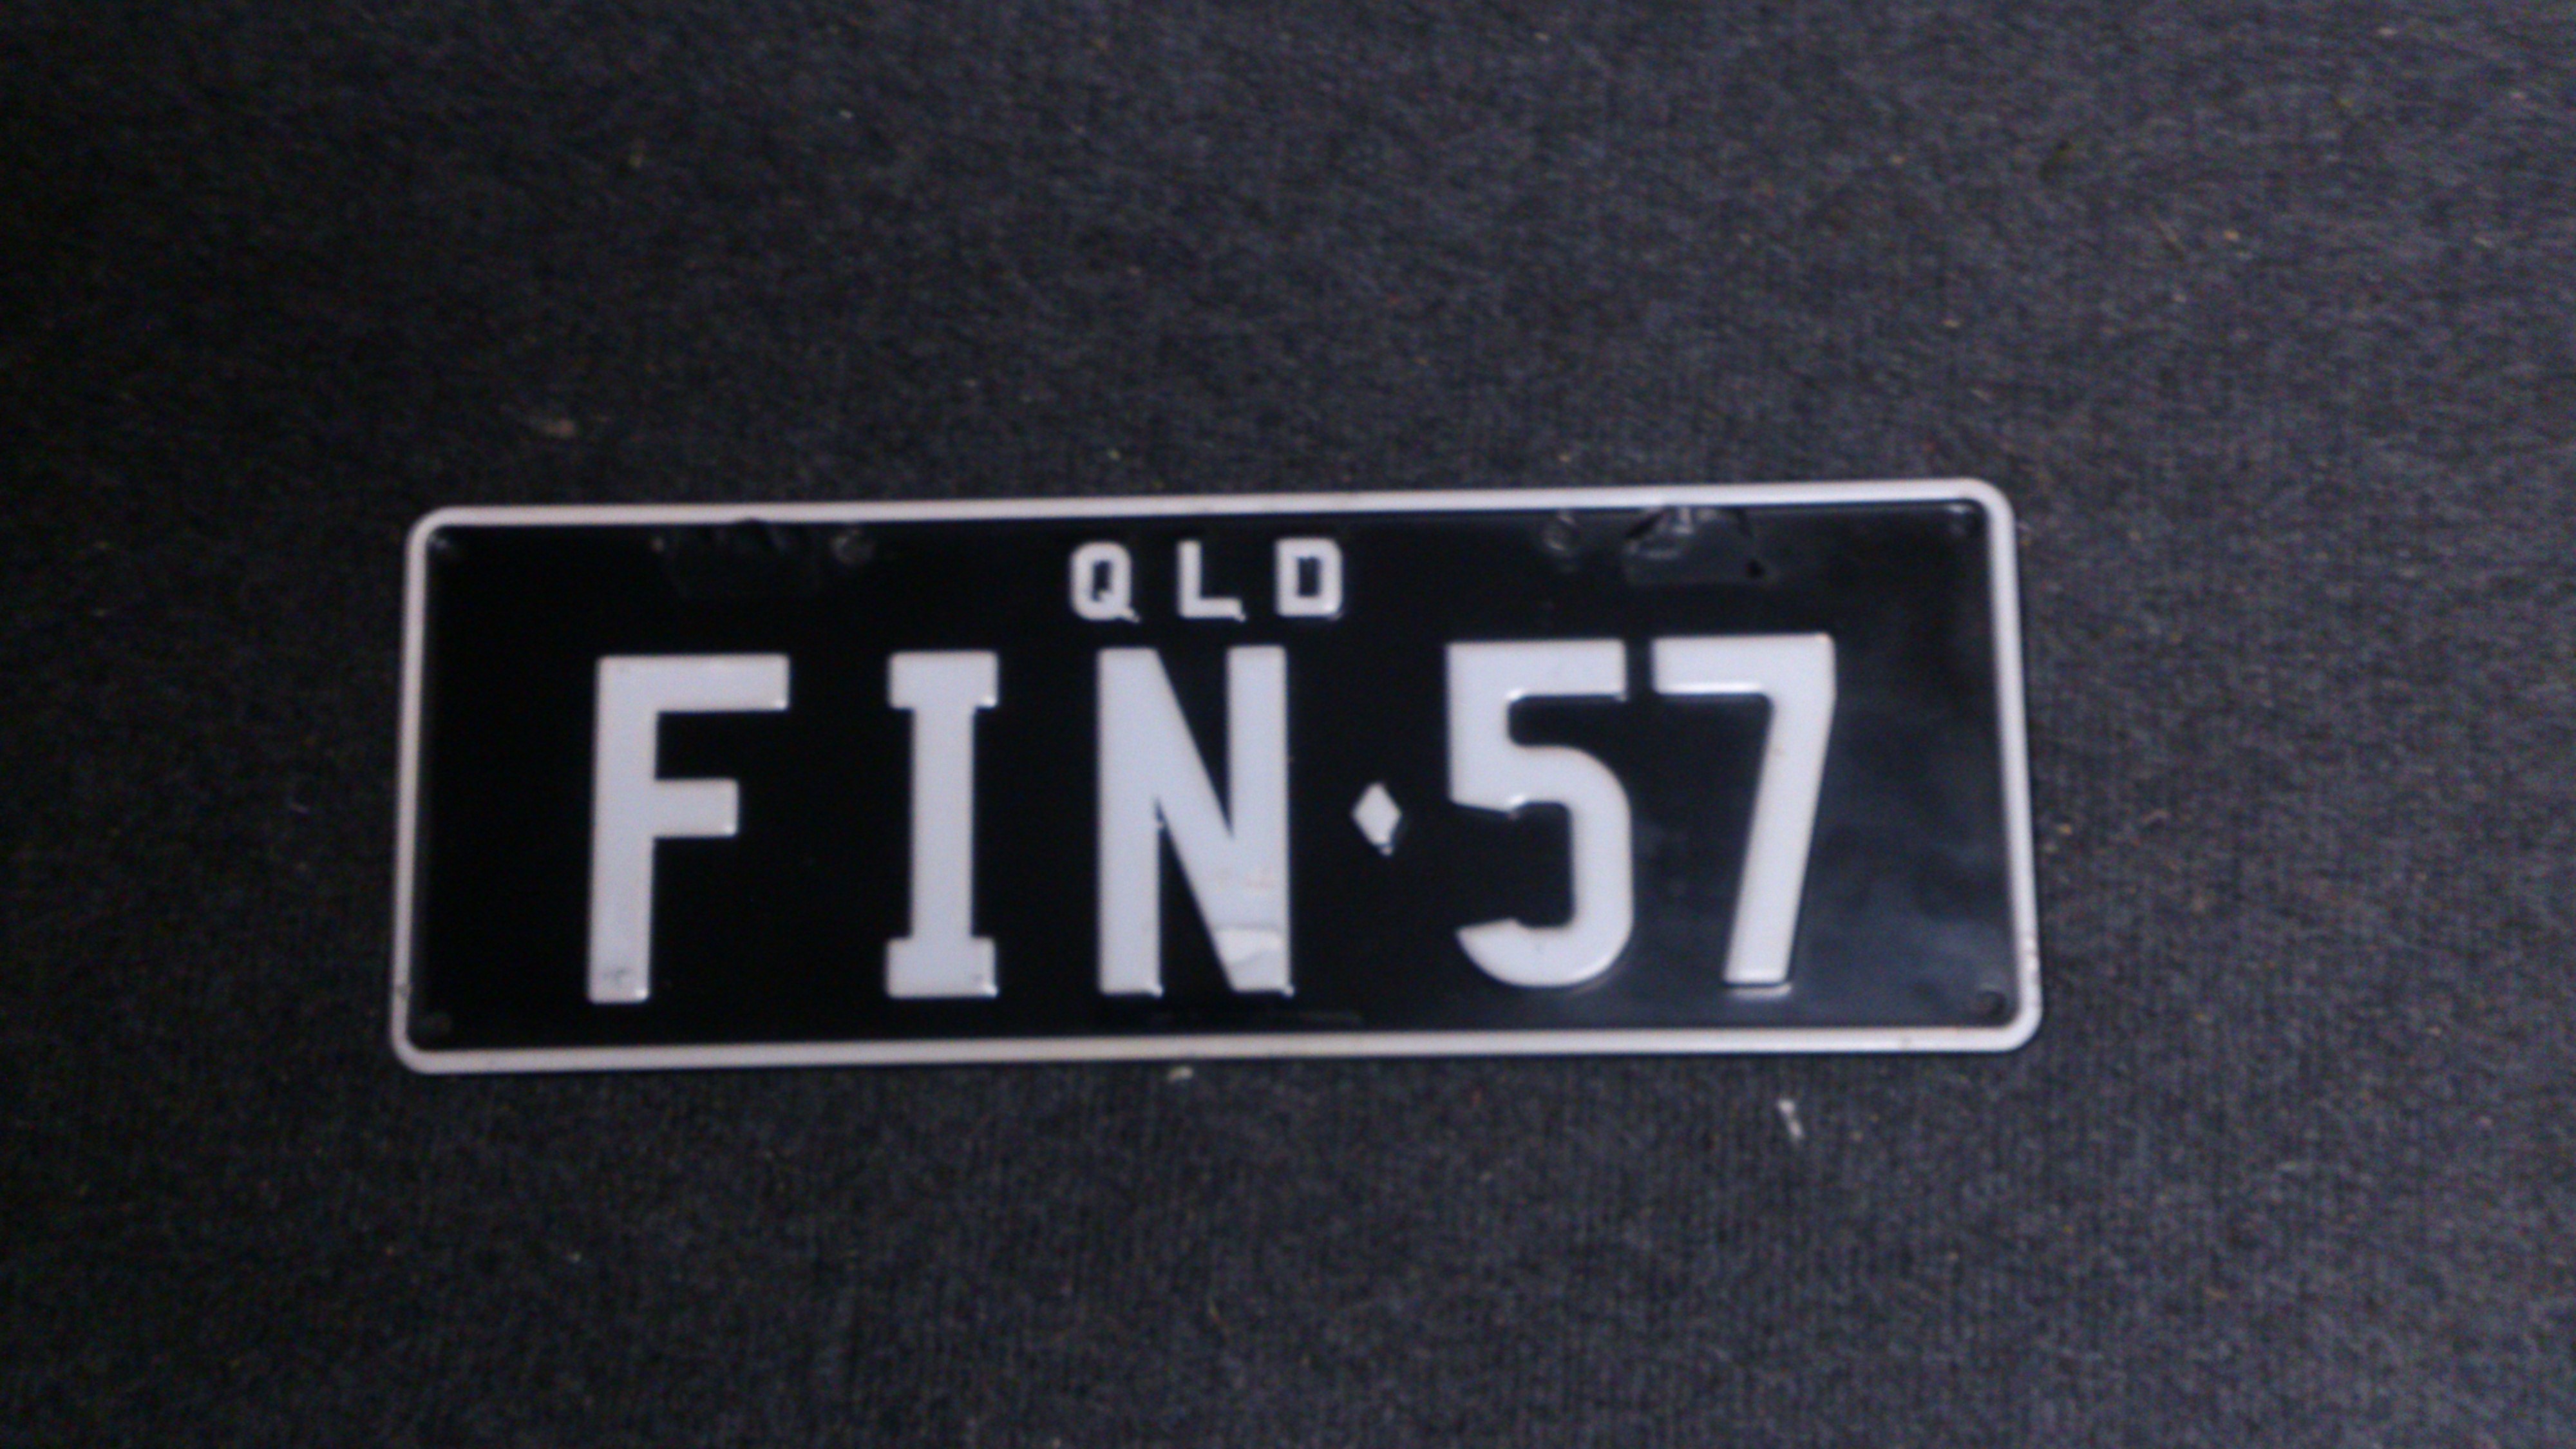 FIN 57 SUIT Chevy,chrysler,cadillac